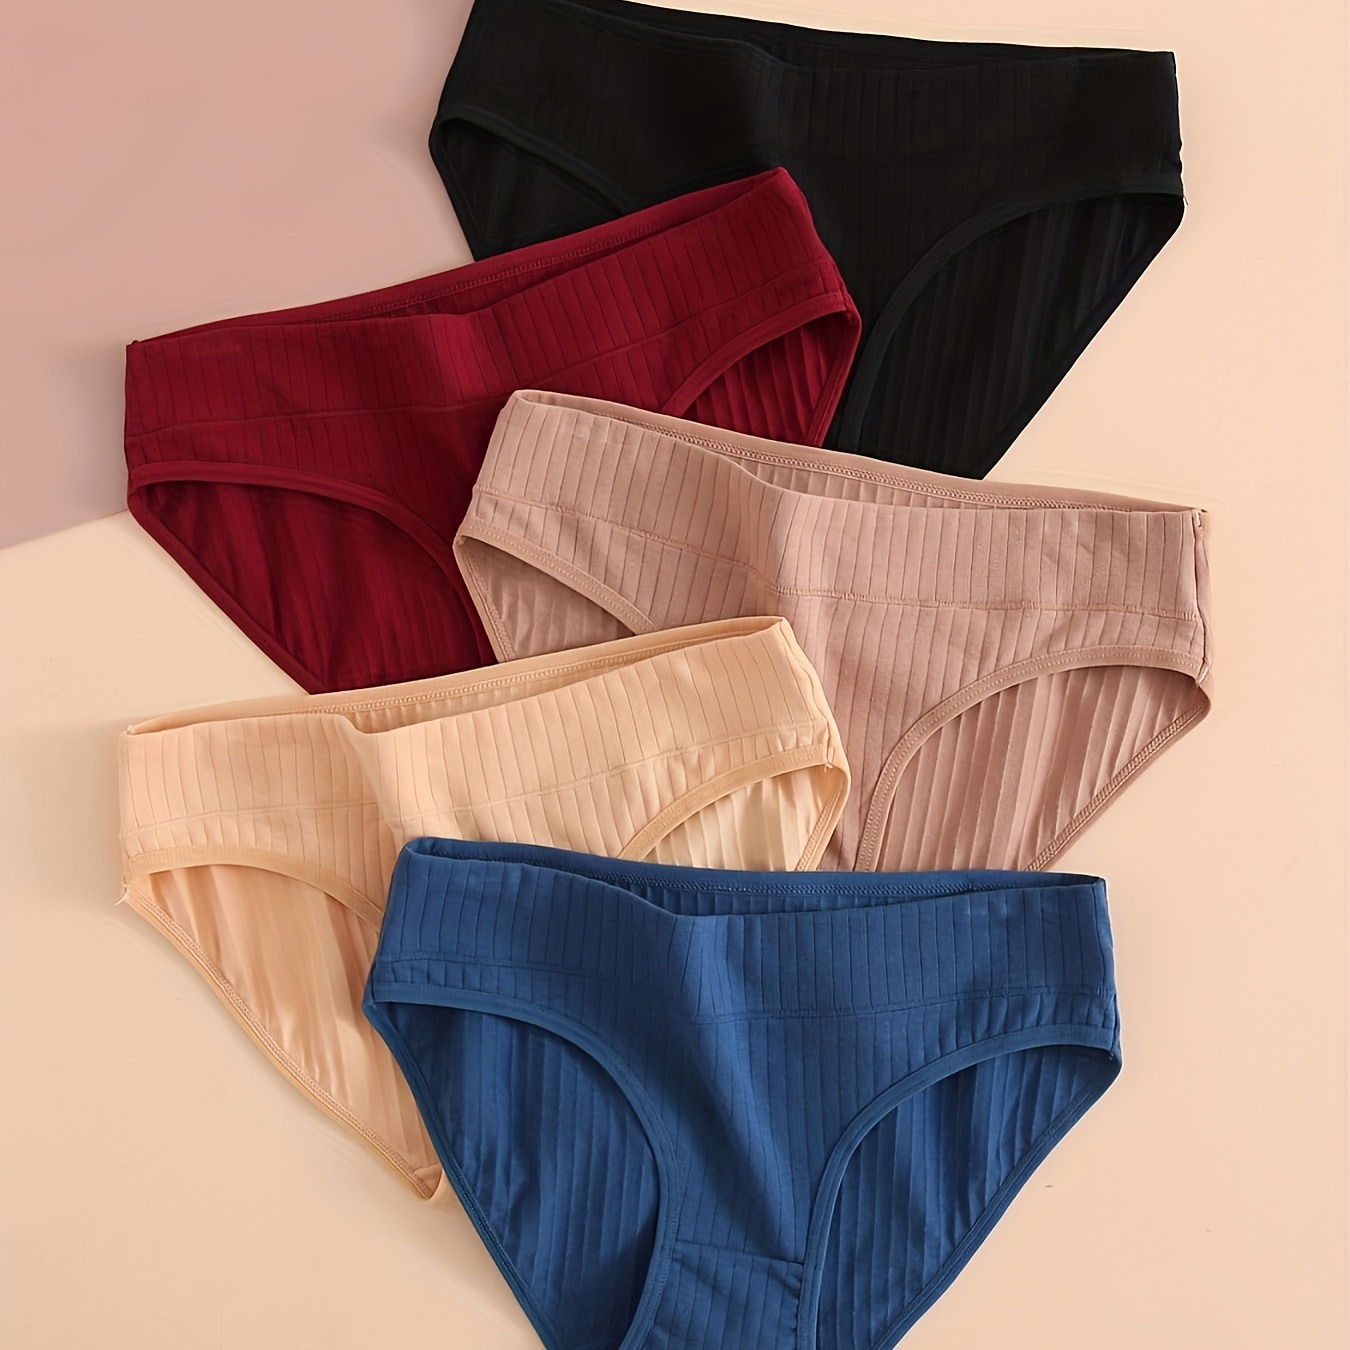 

5pcs Ribbed Solid Briefs, Comfy & Soft Stretchy Intimates Panties, Women's Lingerie & Underwear